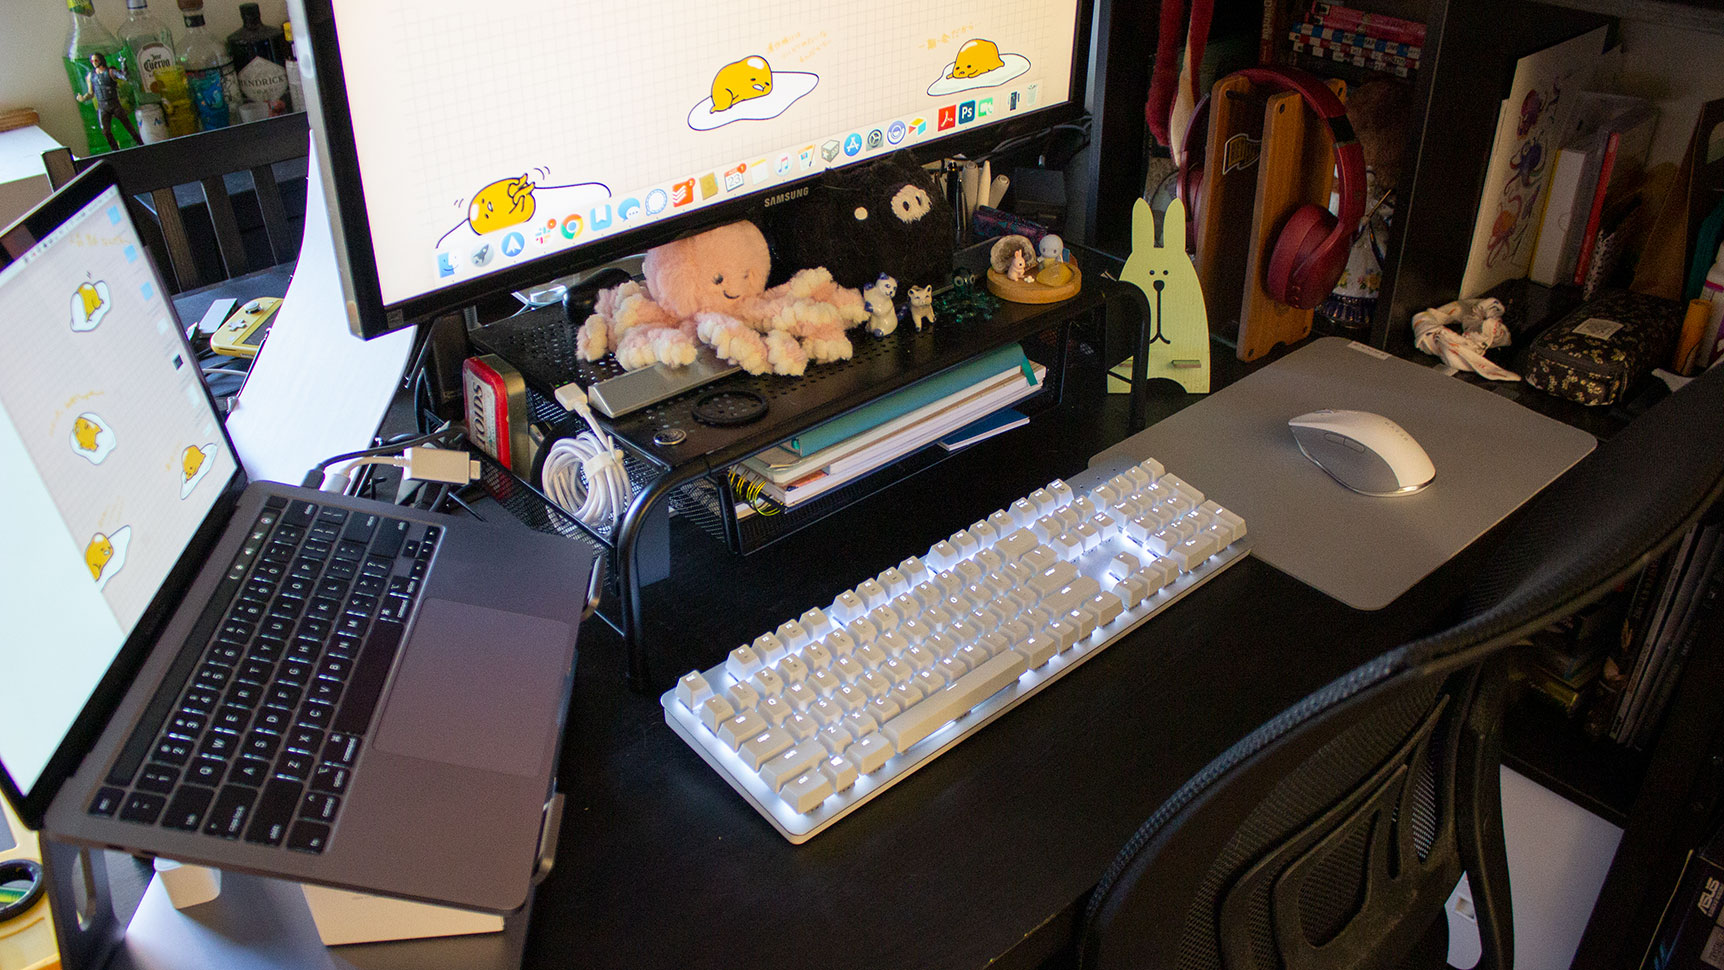 So maybe the plushies UNDERMINE my Adulthood but at least the peripherals don't. (Photo: Victoria Song/Gizmodo)